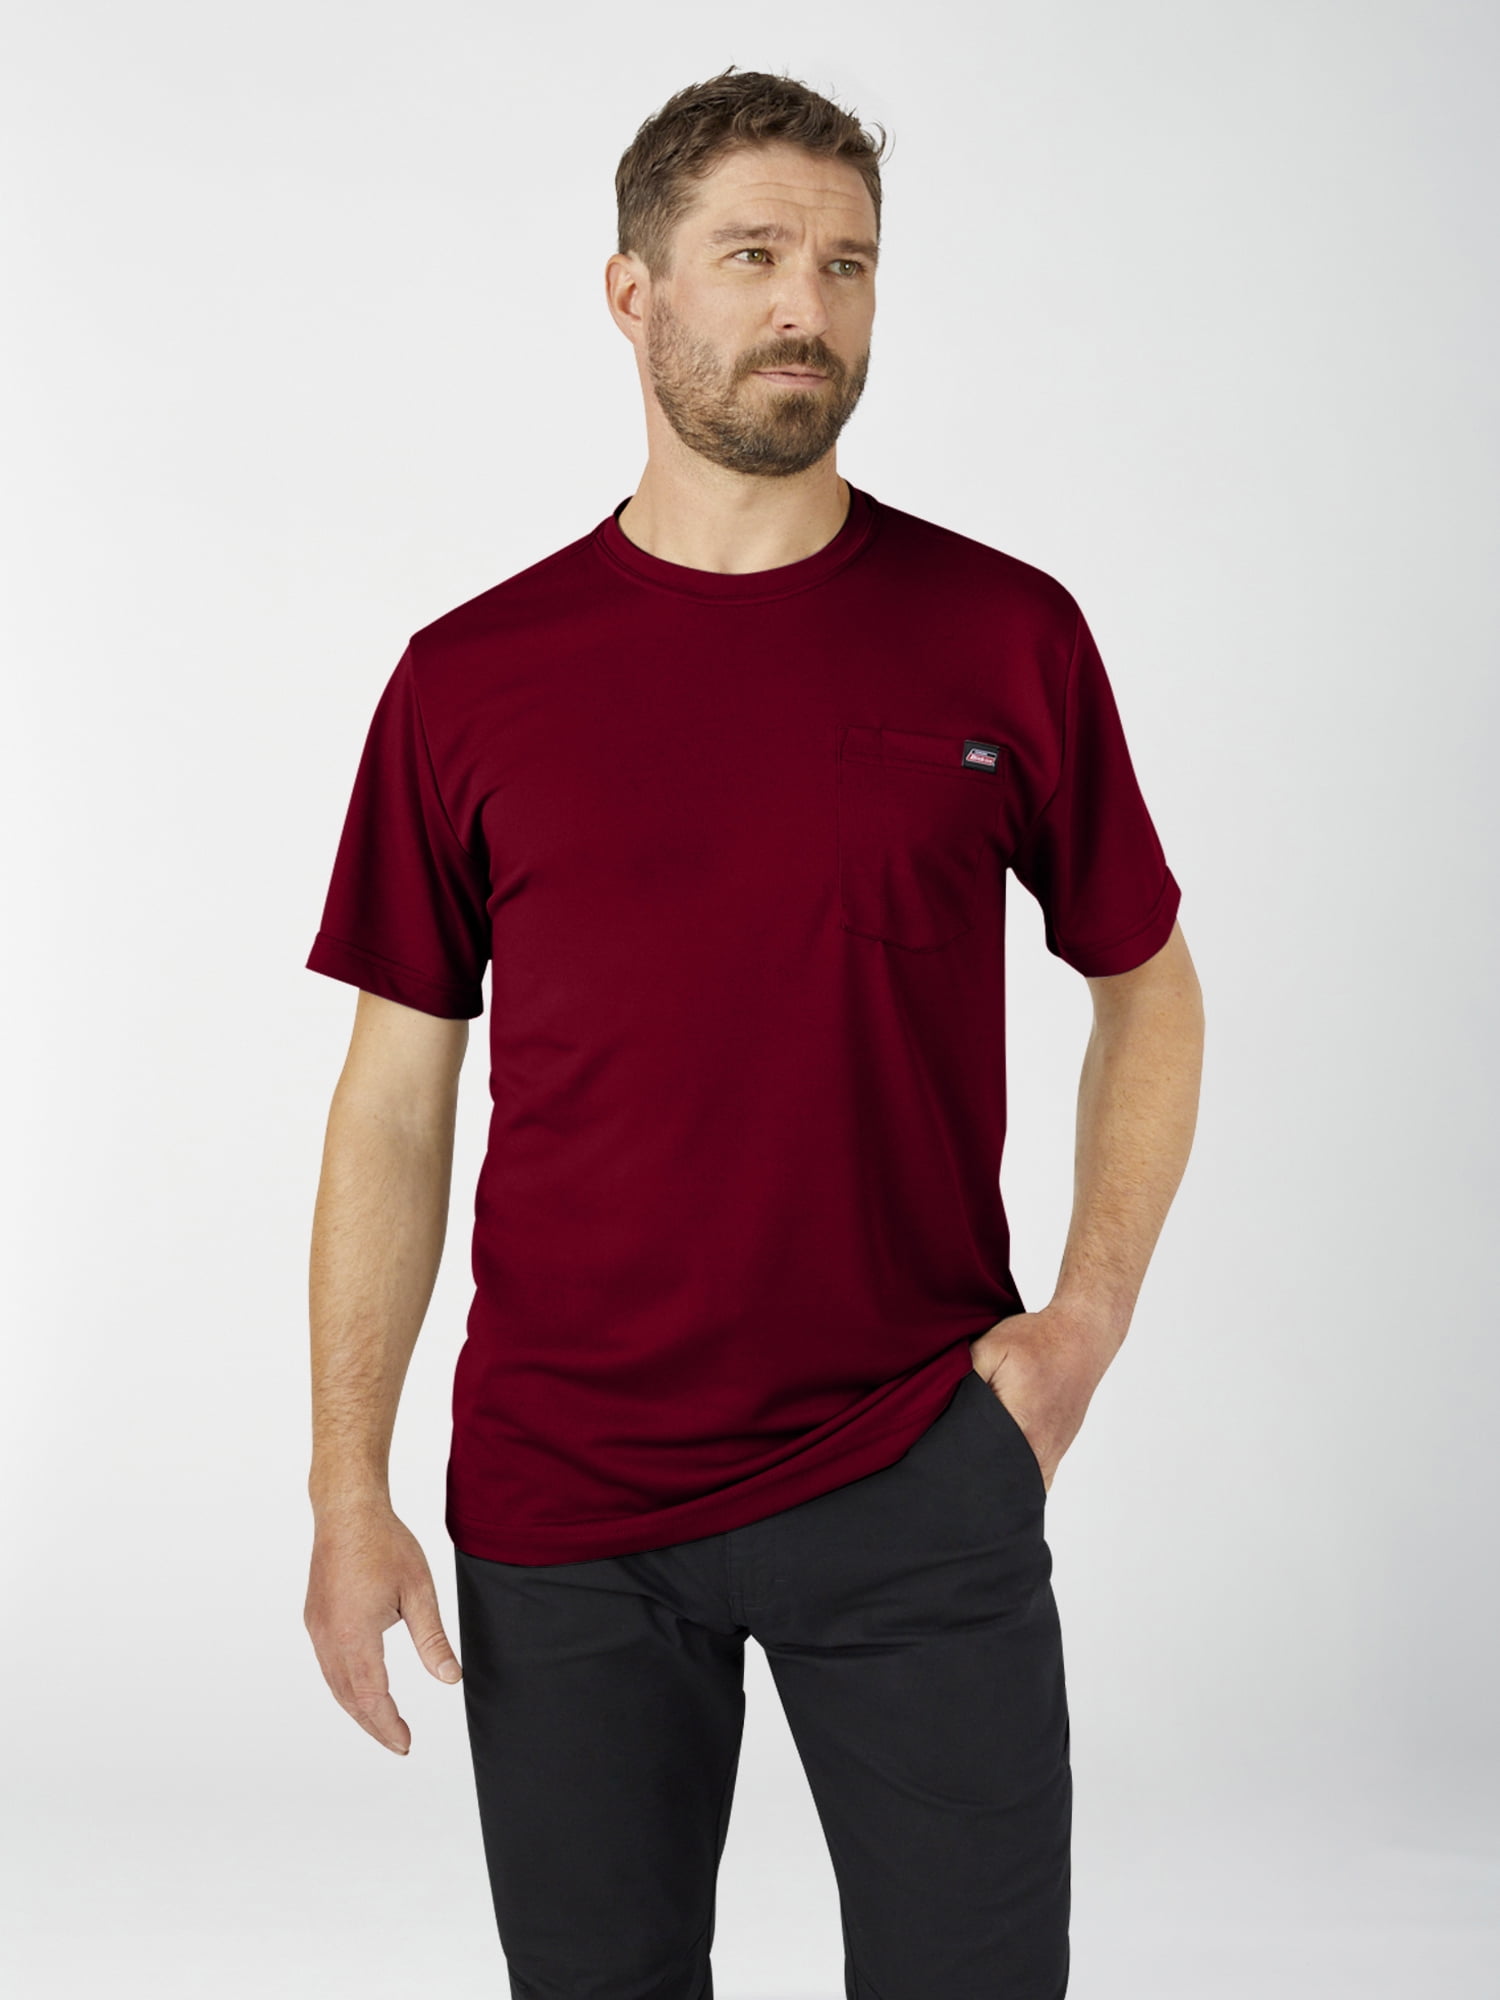 Genuine Dickies Men\'s Relaxed Fit Performance Polyester Tee Shirt